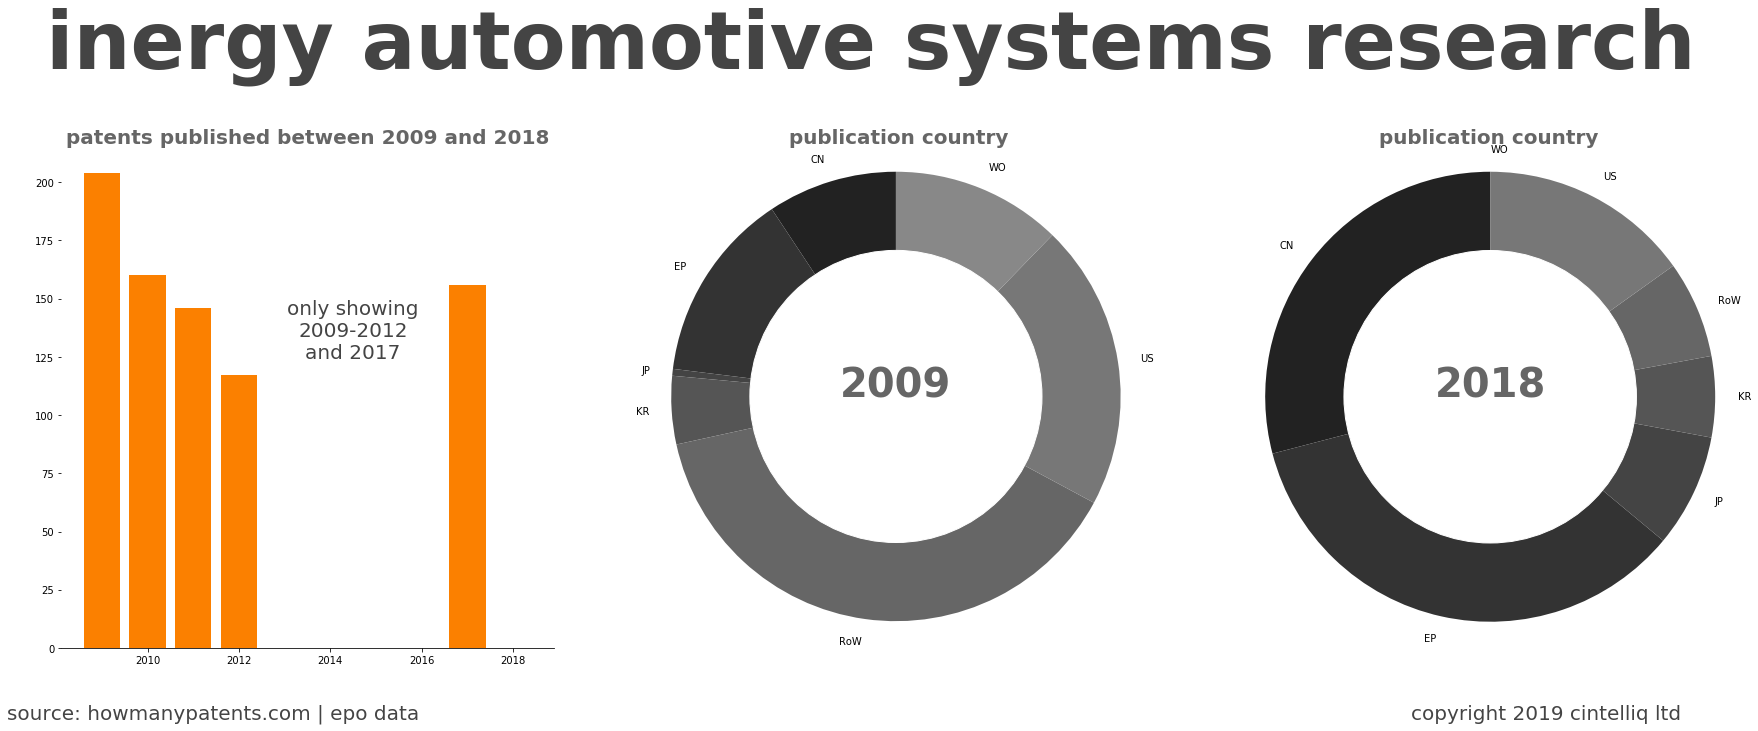 summary of patents for Inergy Automotive Systems Research